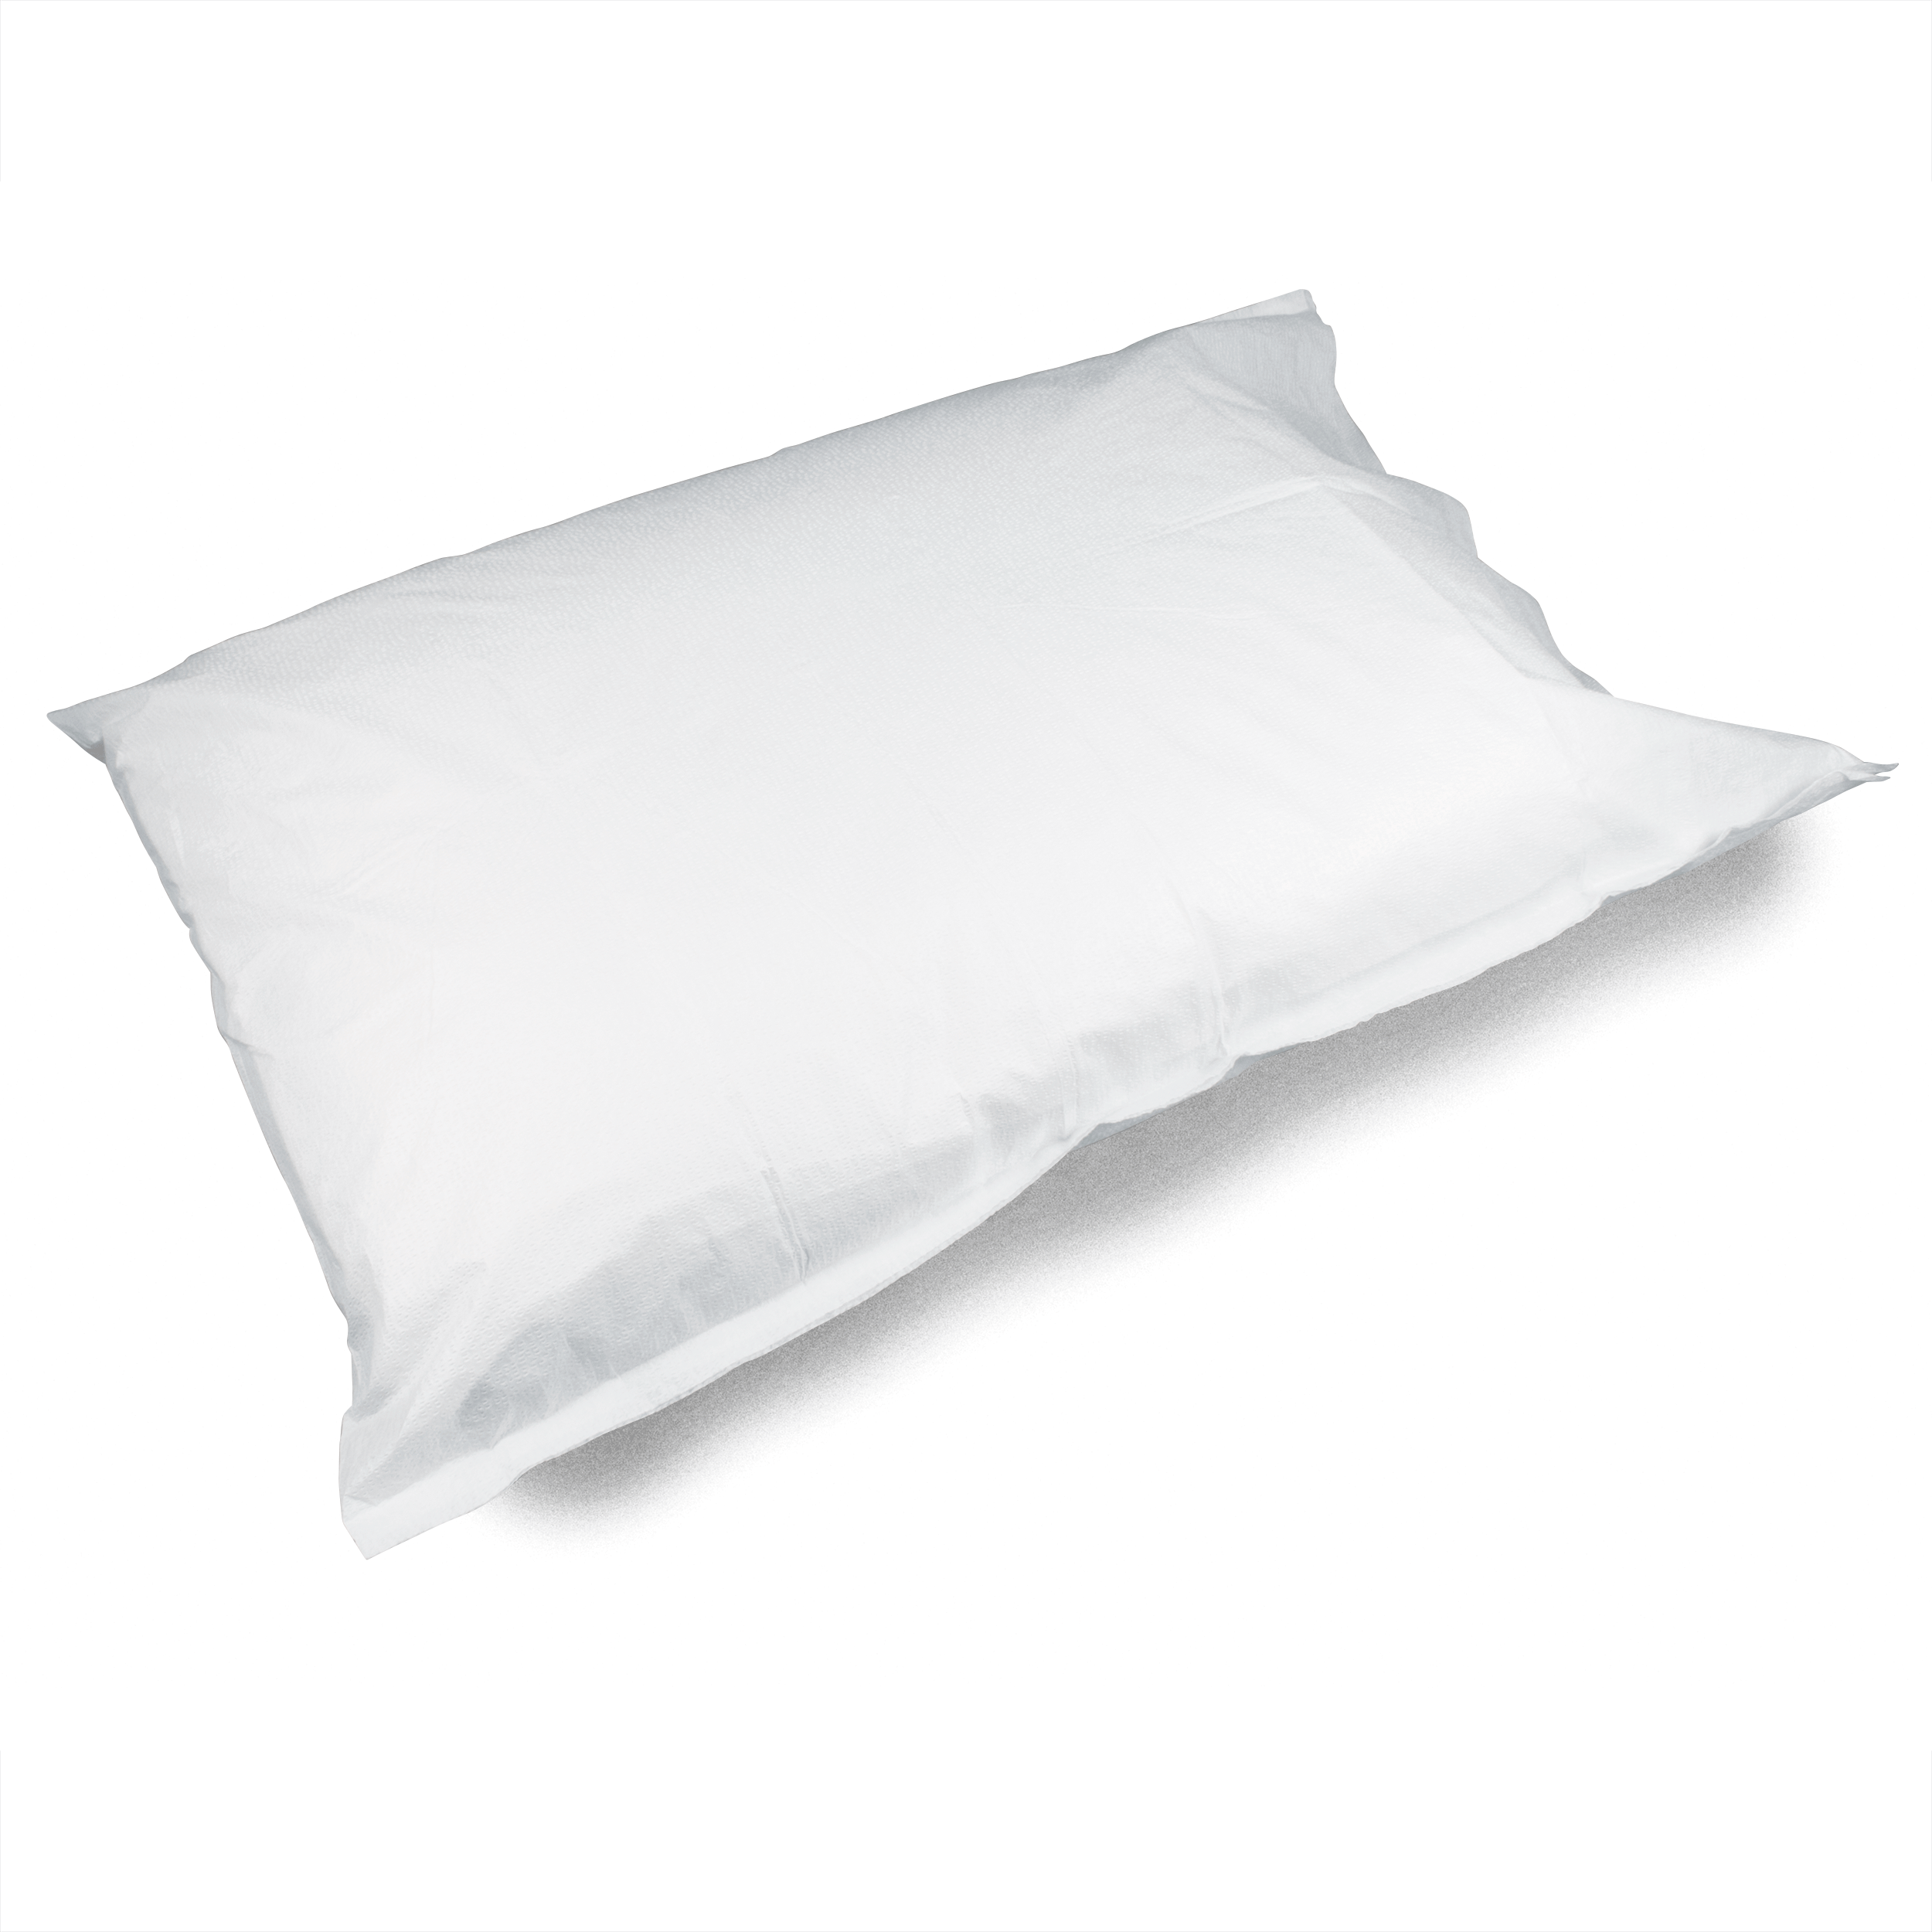 Pillow Cases – TP 2-Ply, White, 21